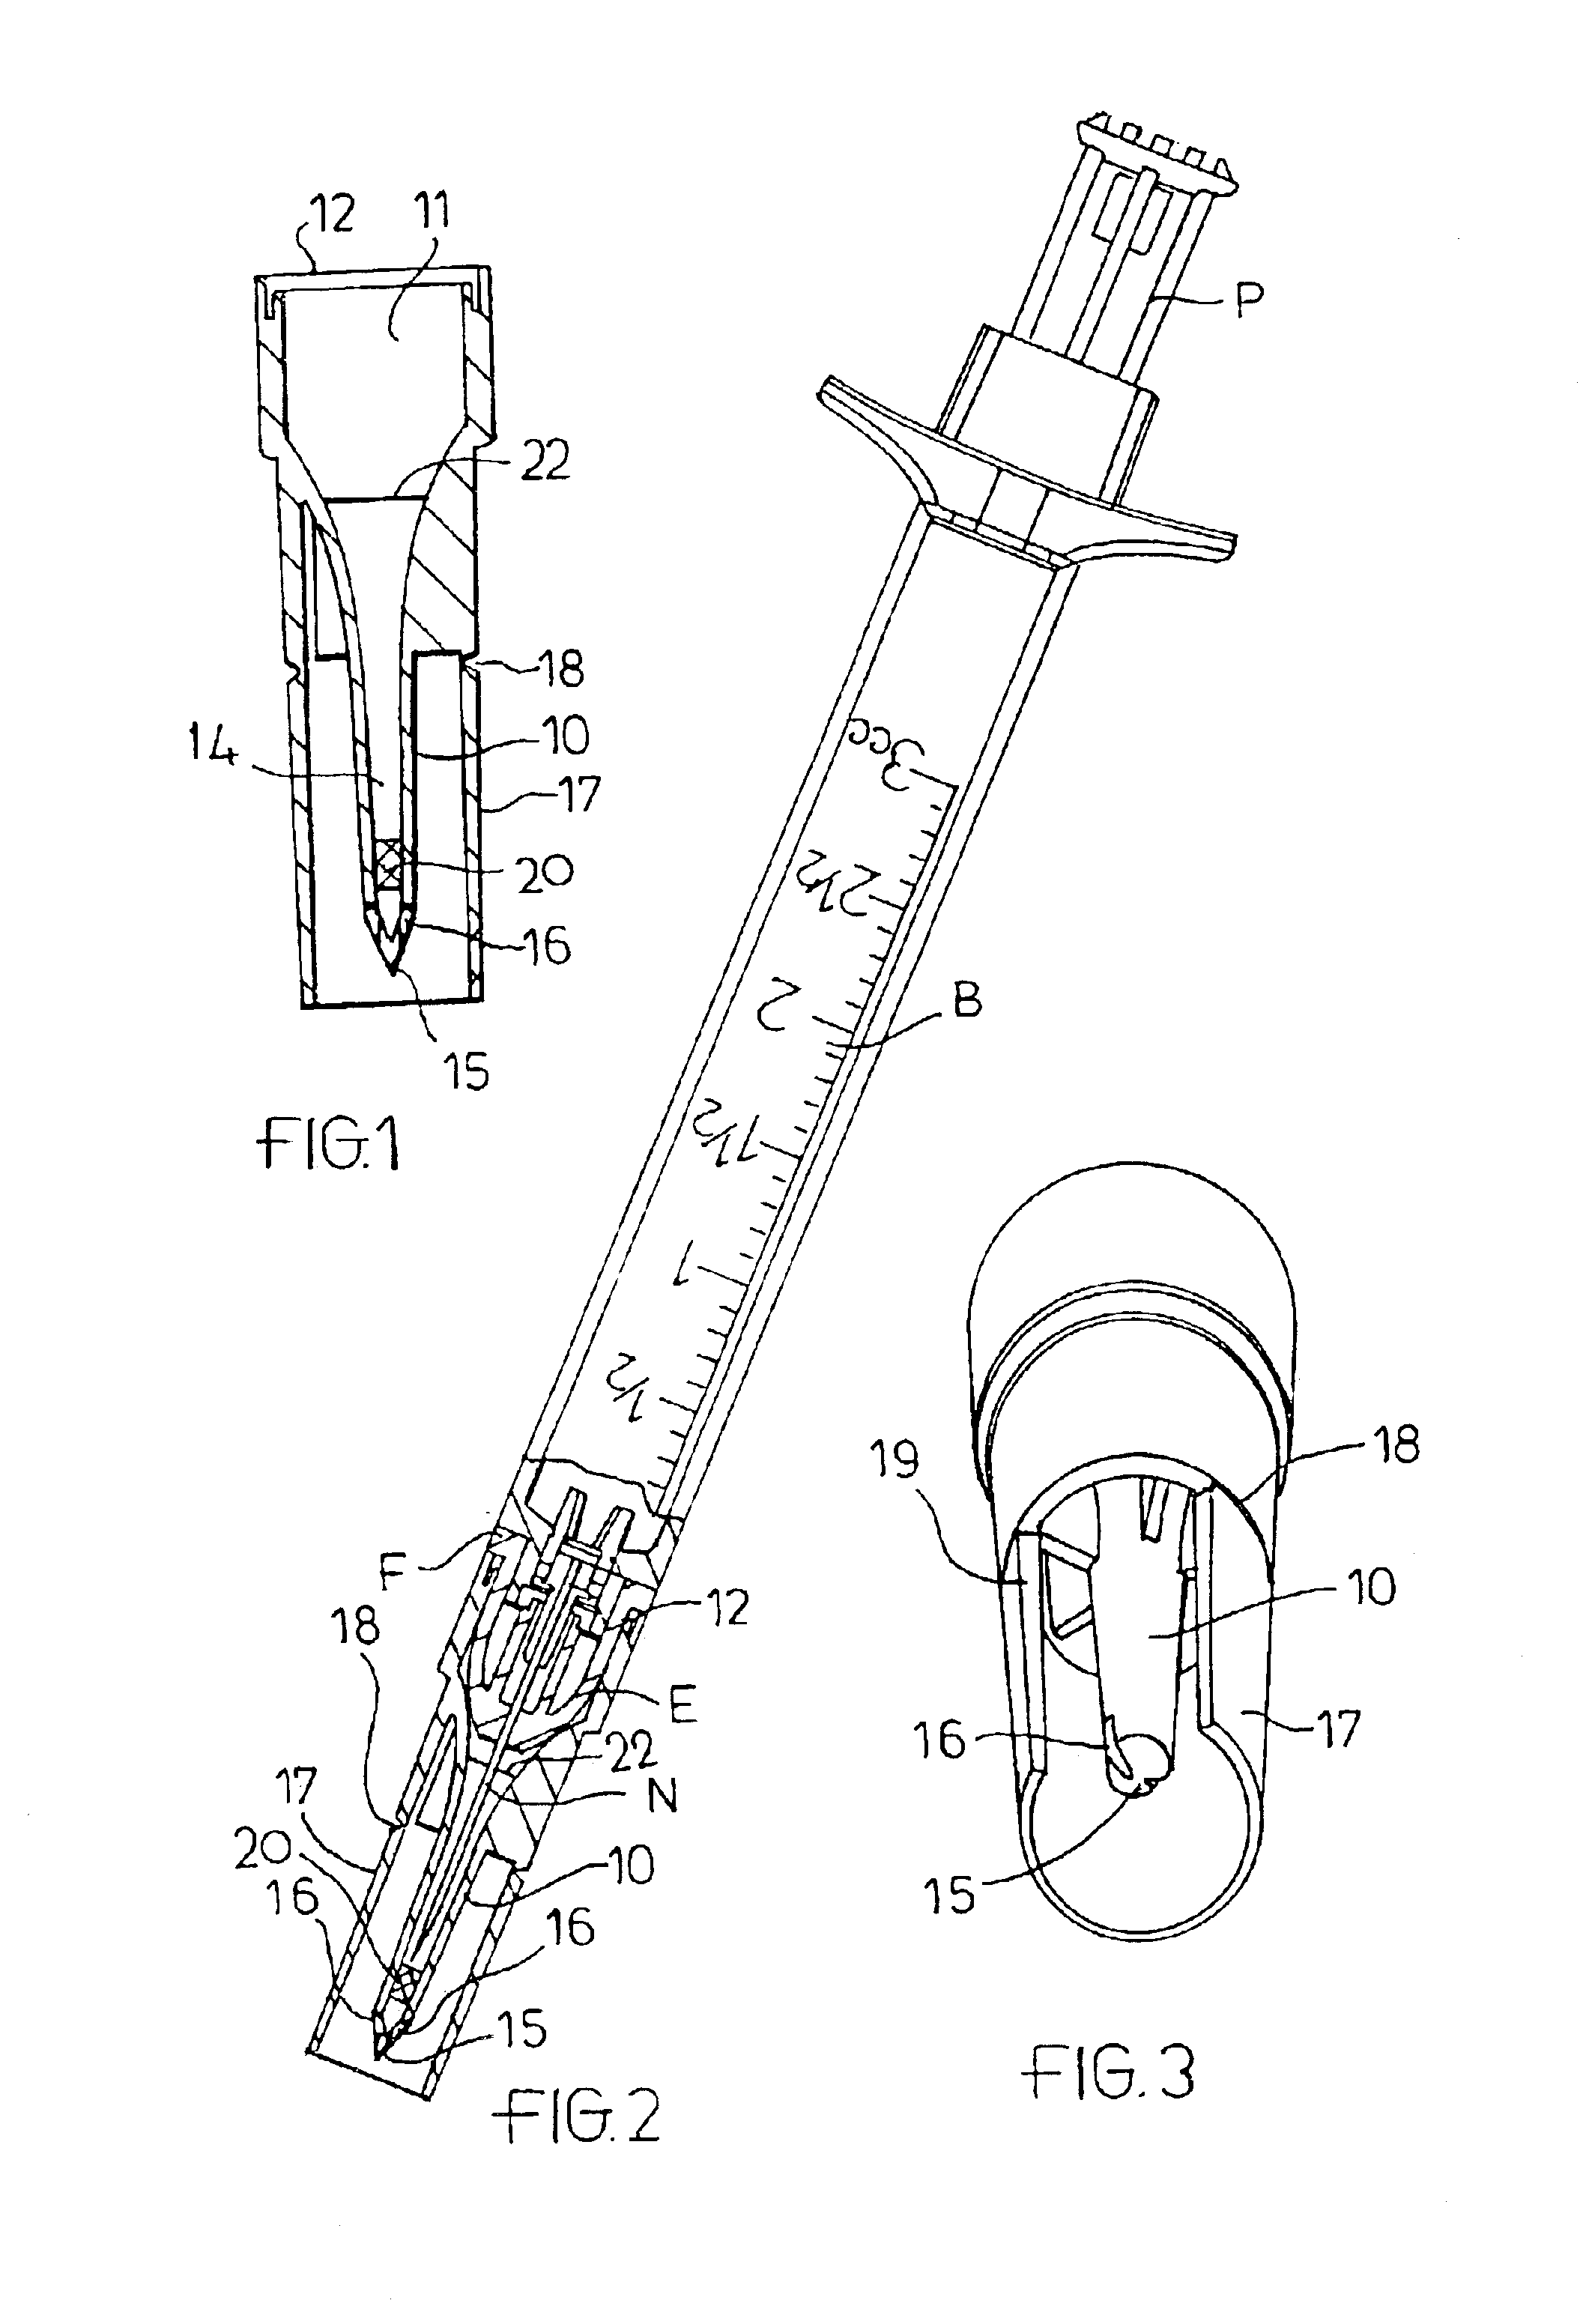 Retractable needle syringe including a sheath and an intravenous adapter